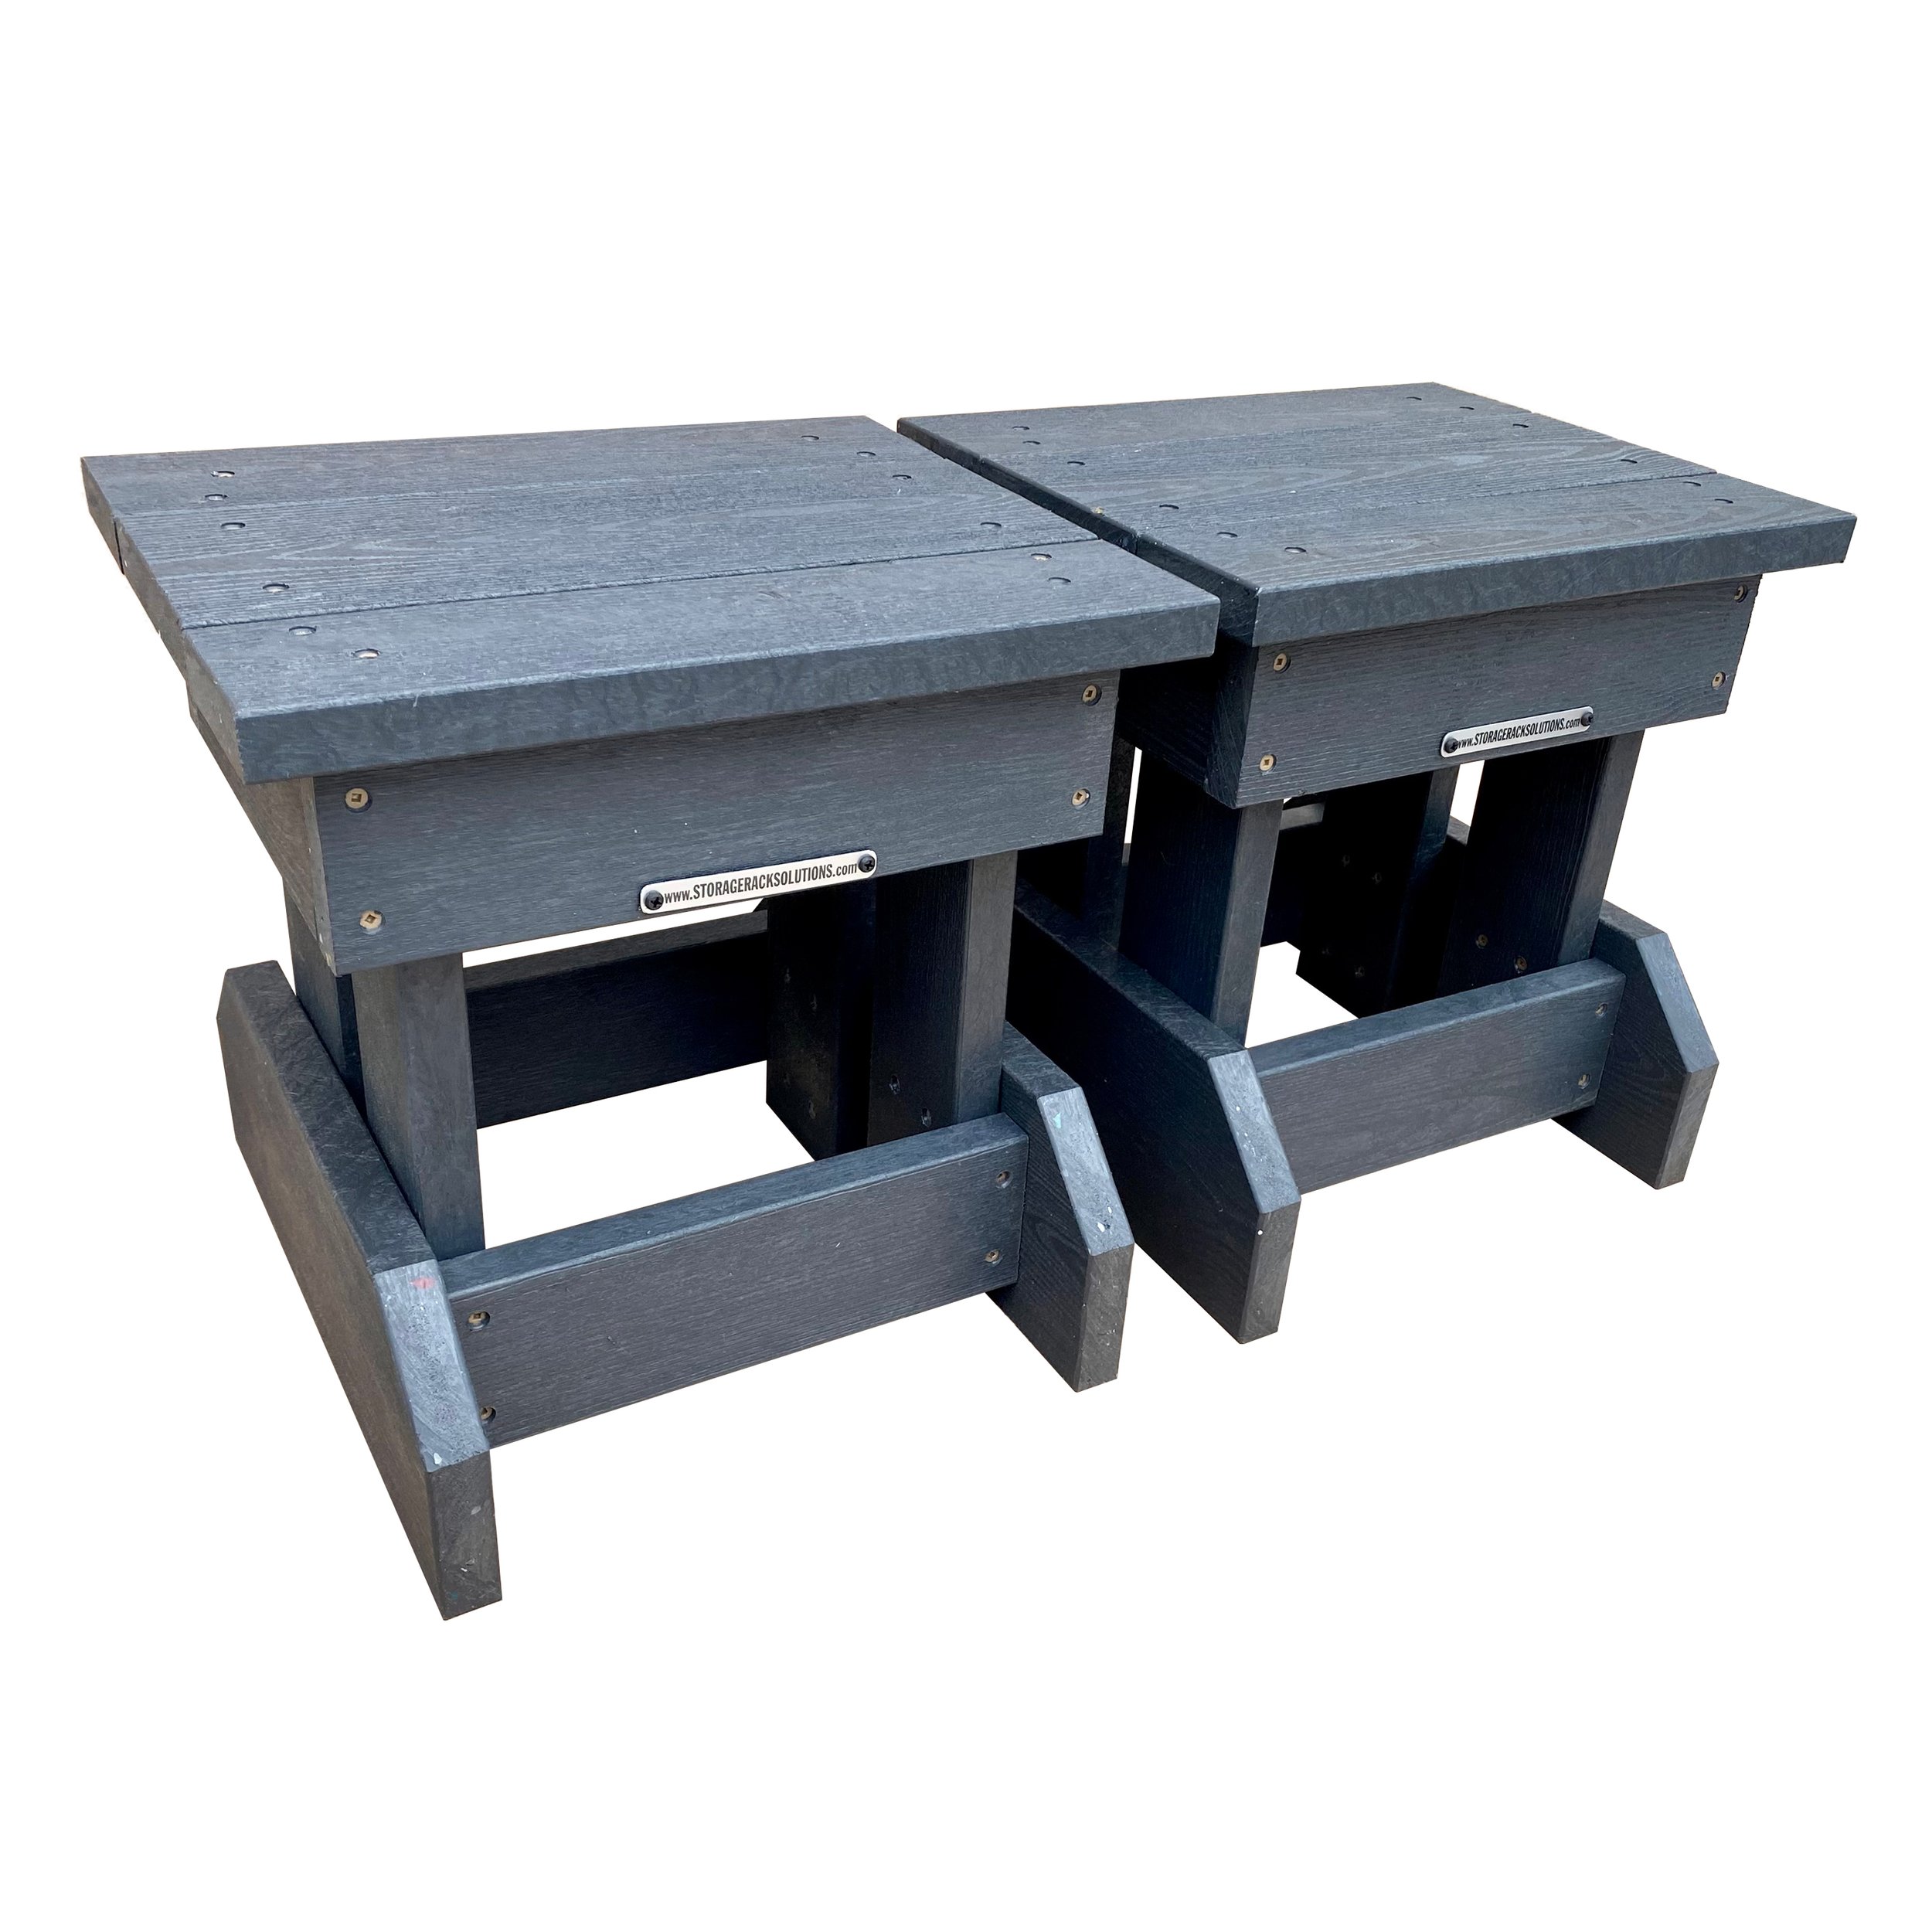 Storage Rack Solutions - Outdoor Benches - For Fire pit, Lawn, Garden - 2 Small Benches